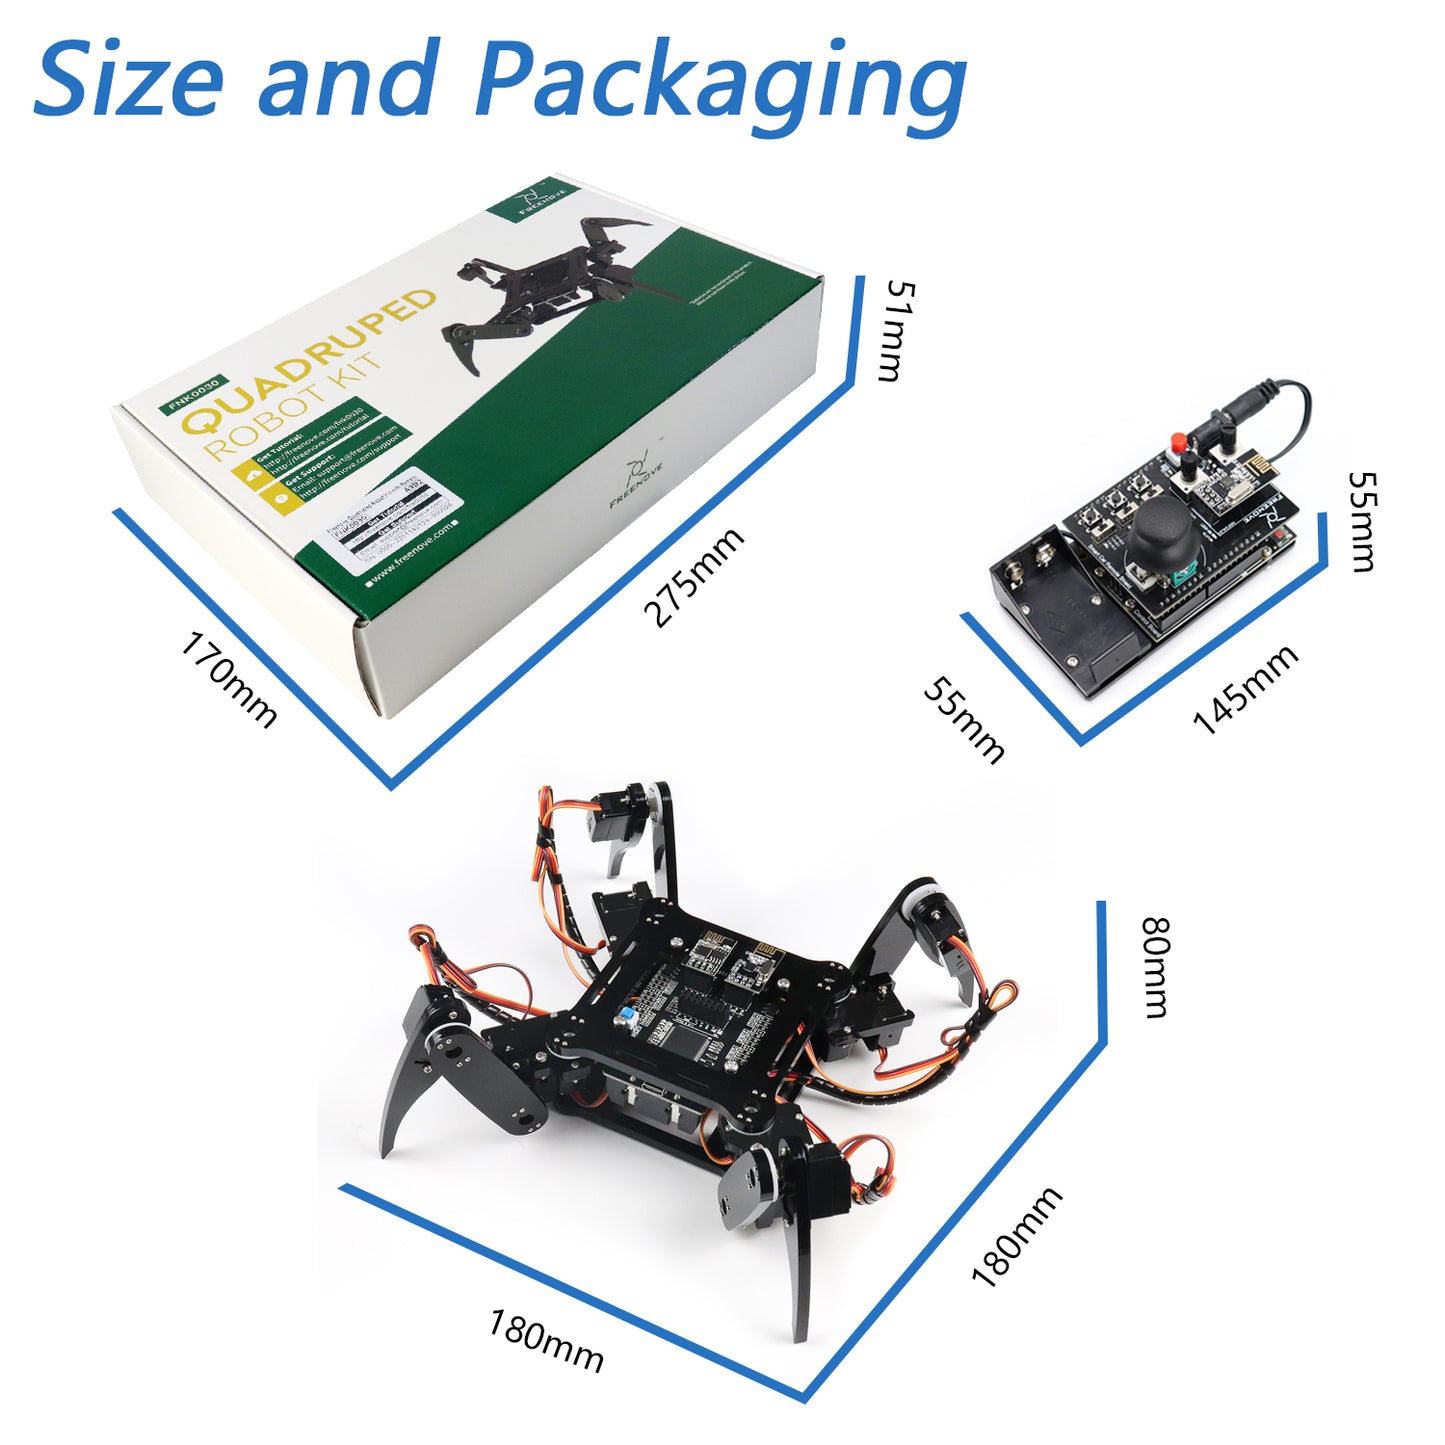 Freenove Quadruped Robot Kit (Compatible with Arduino IDE)